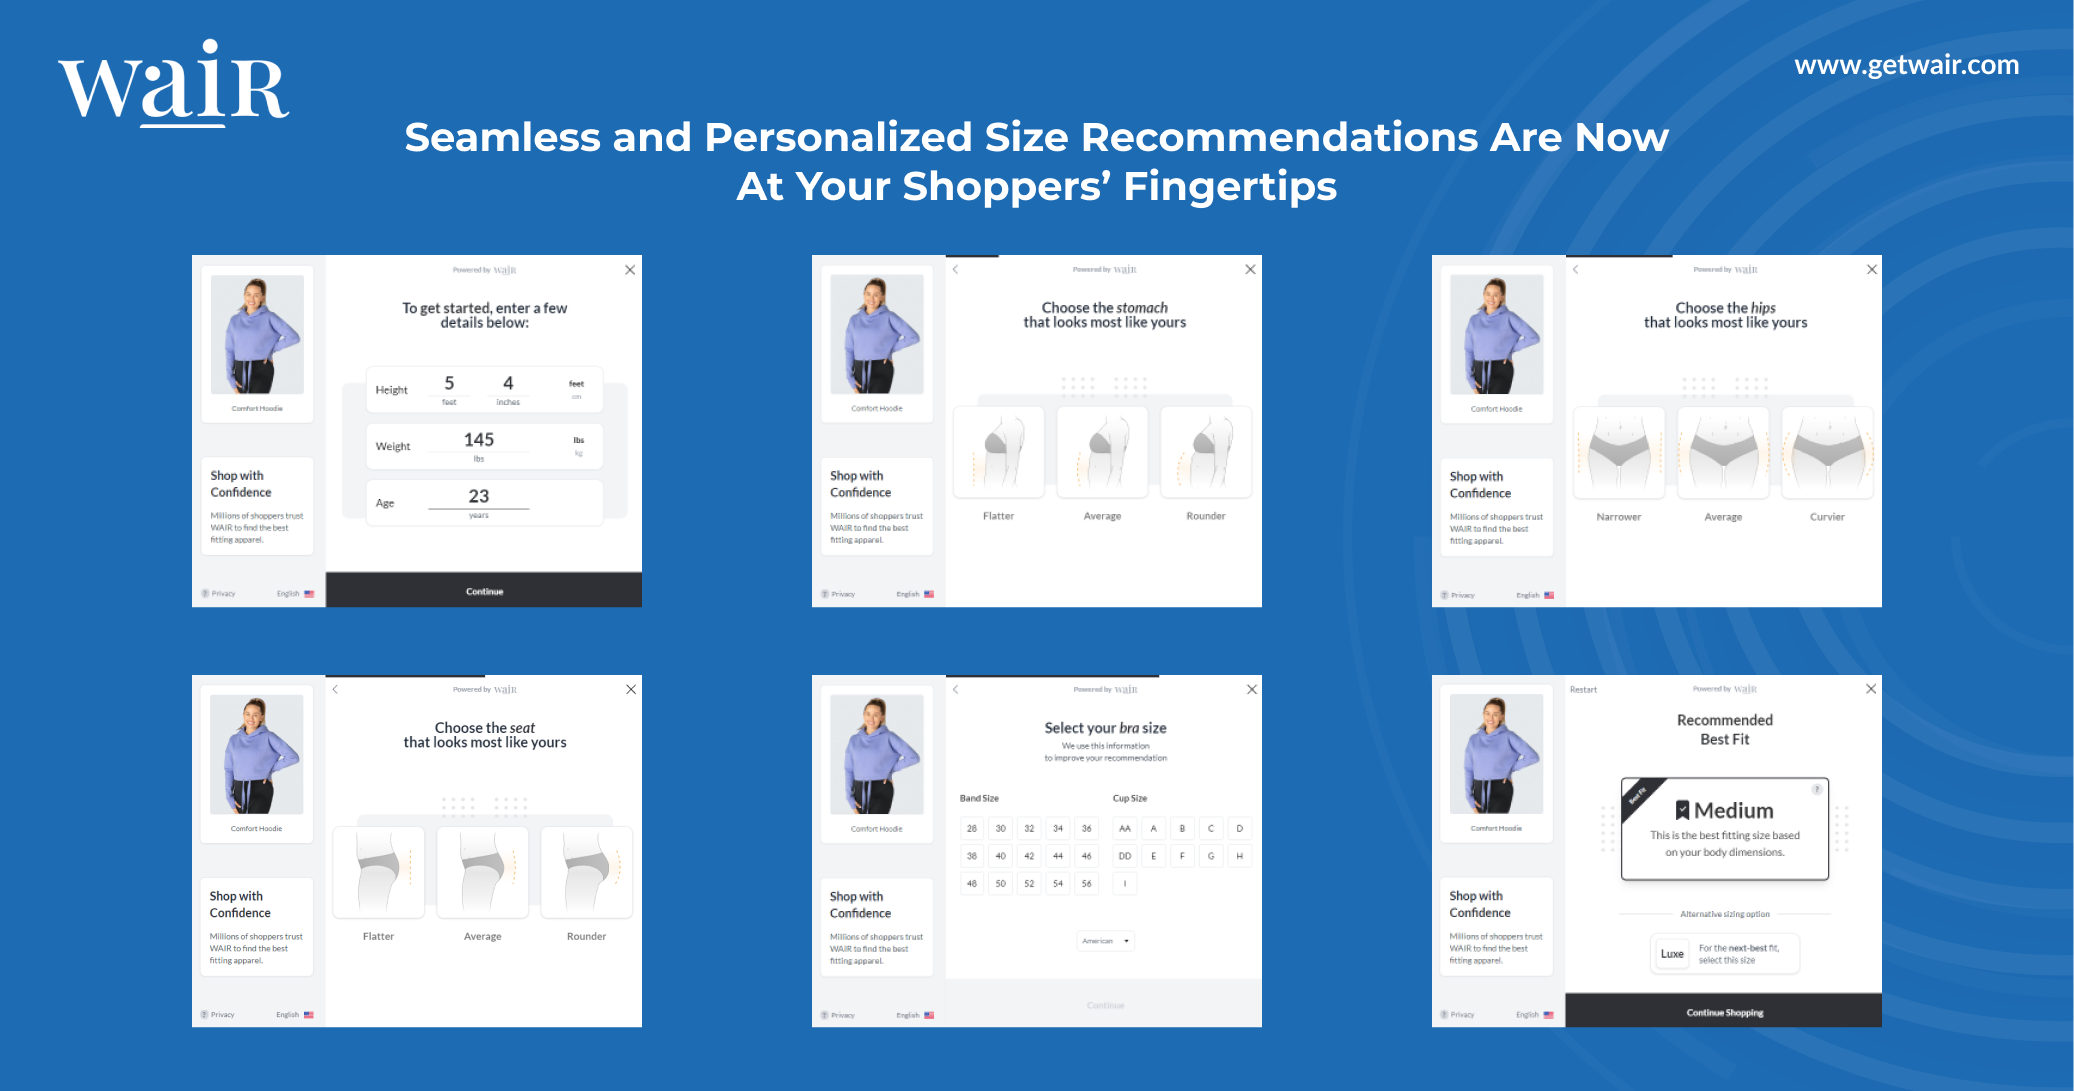 WAIR's eCommerce sizing tool in action